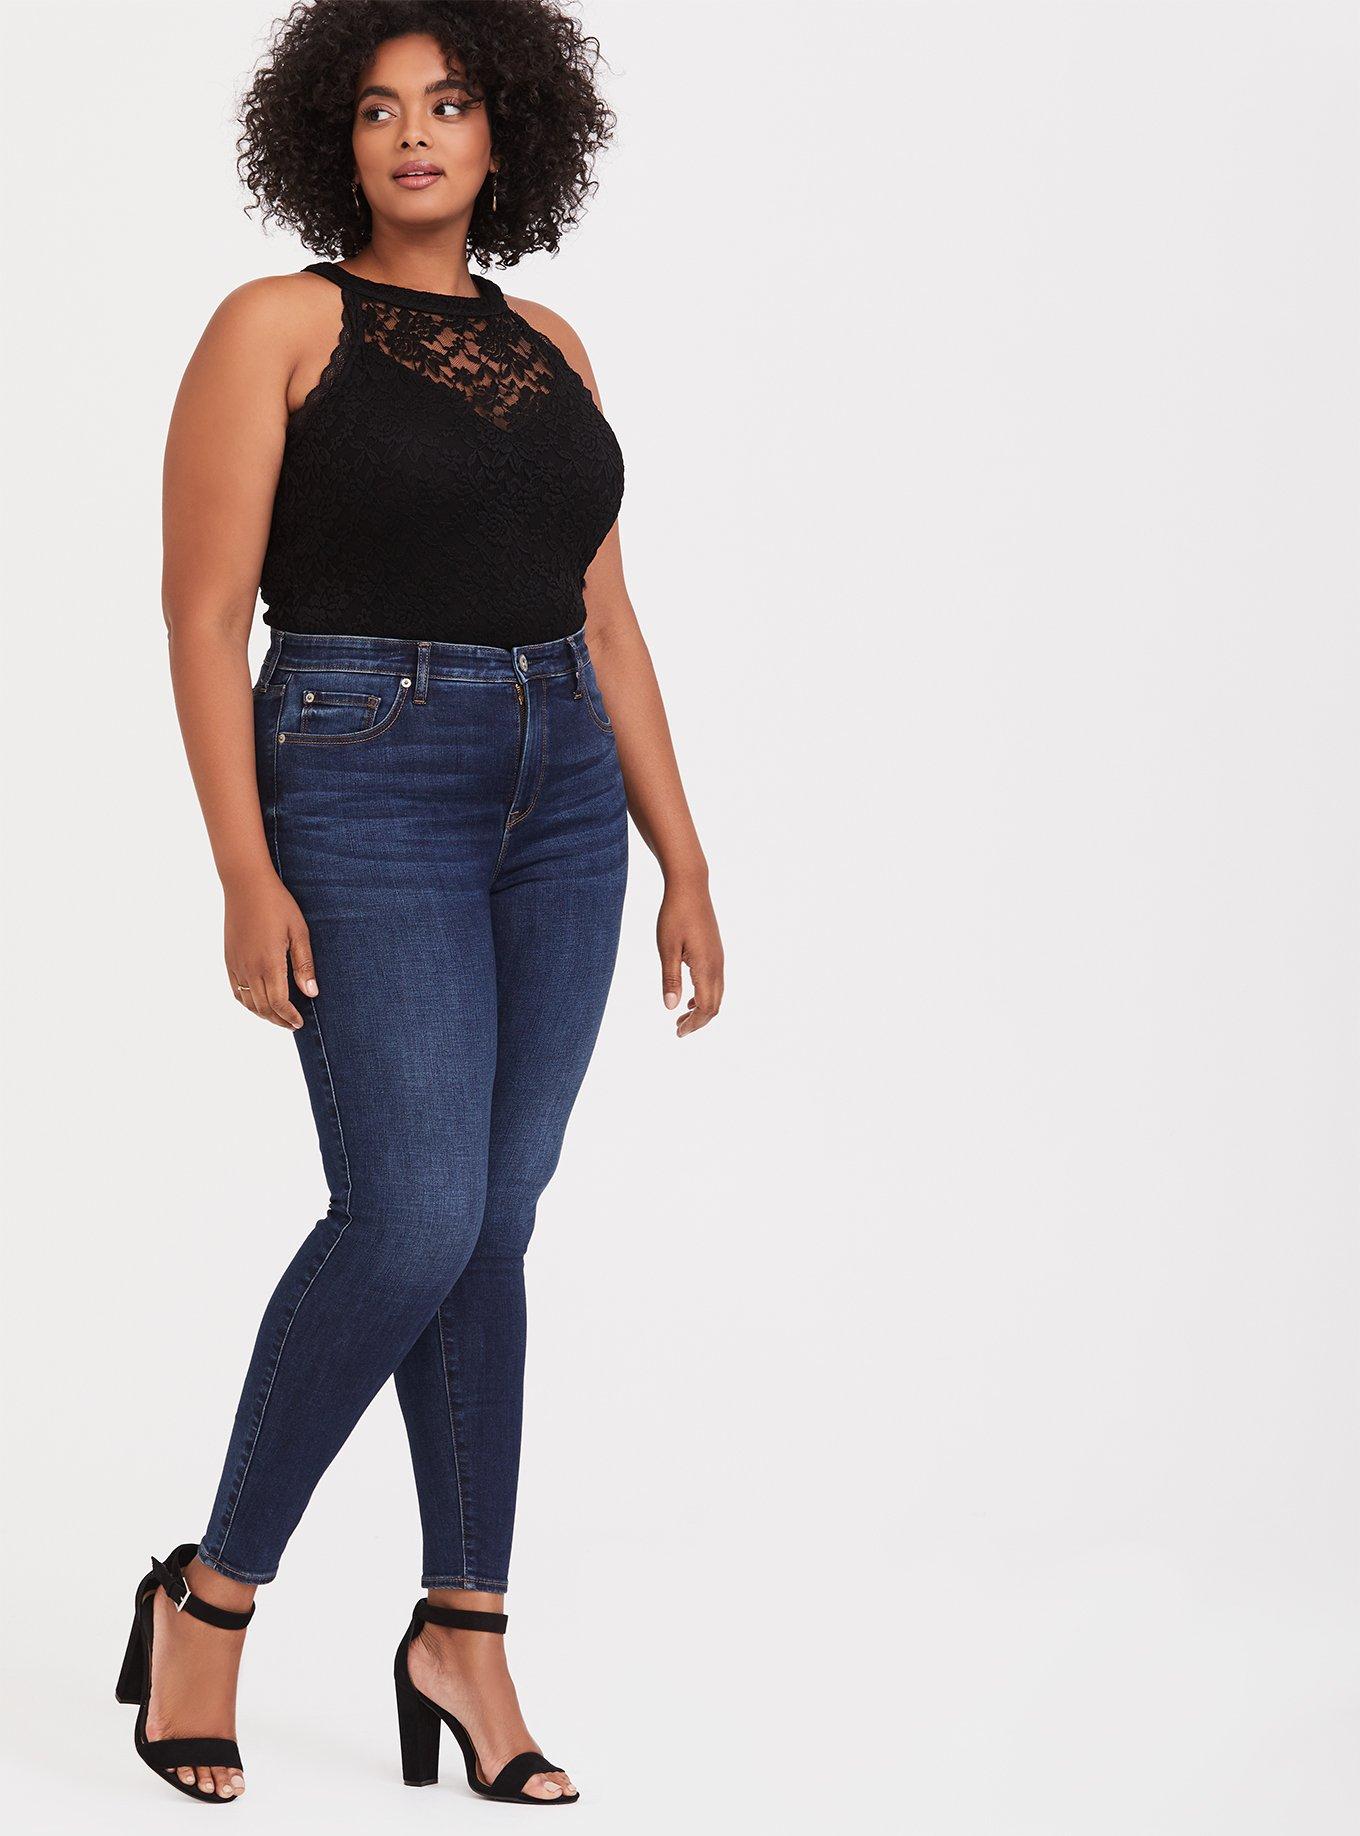 Time to go down another size.. Jeans and Lace bodysuit from @torrid #s